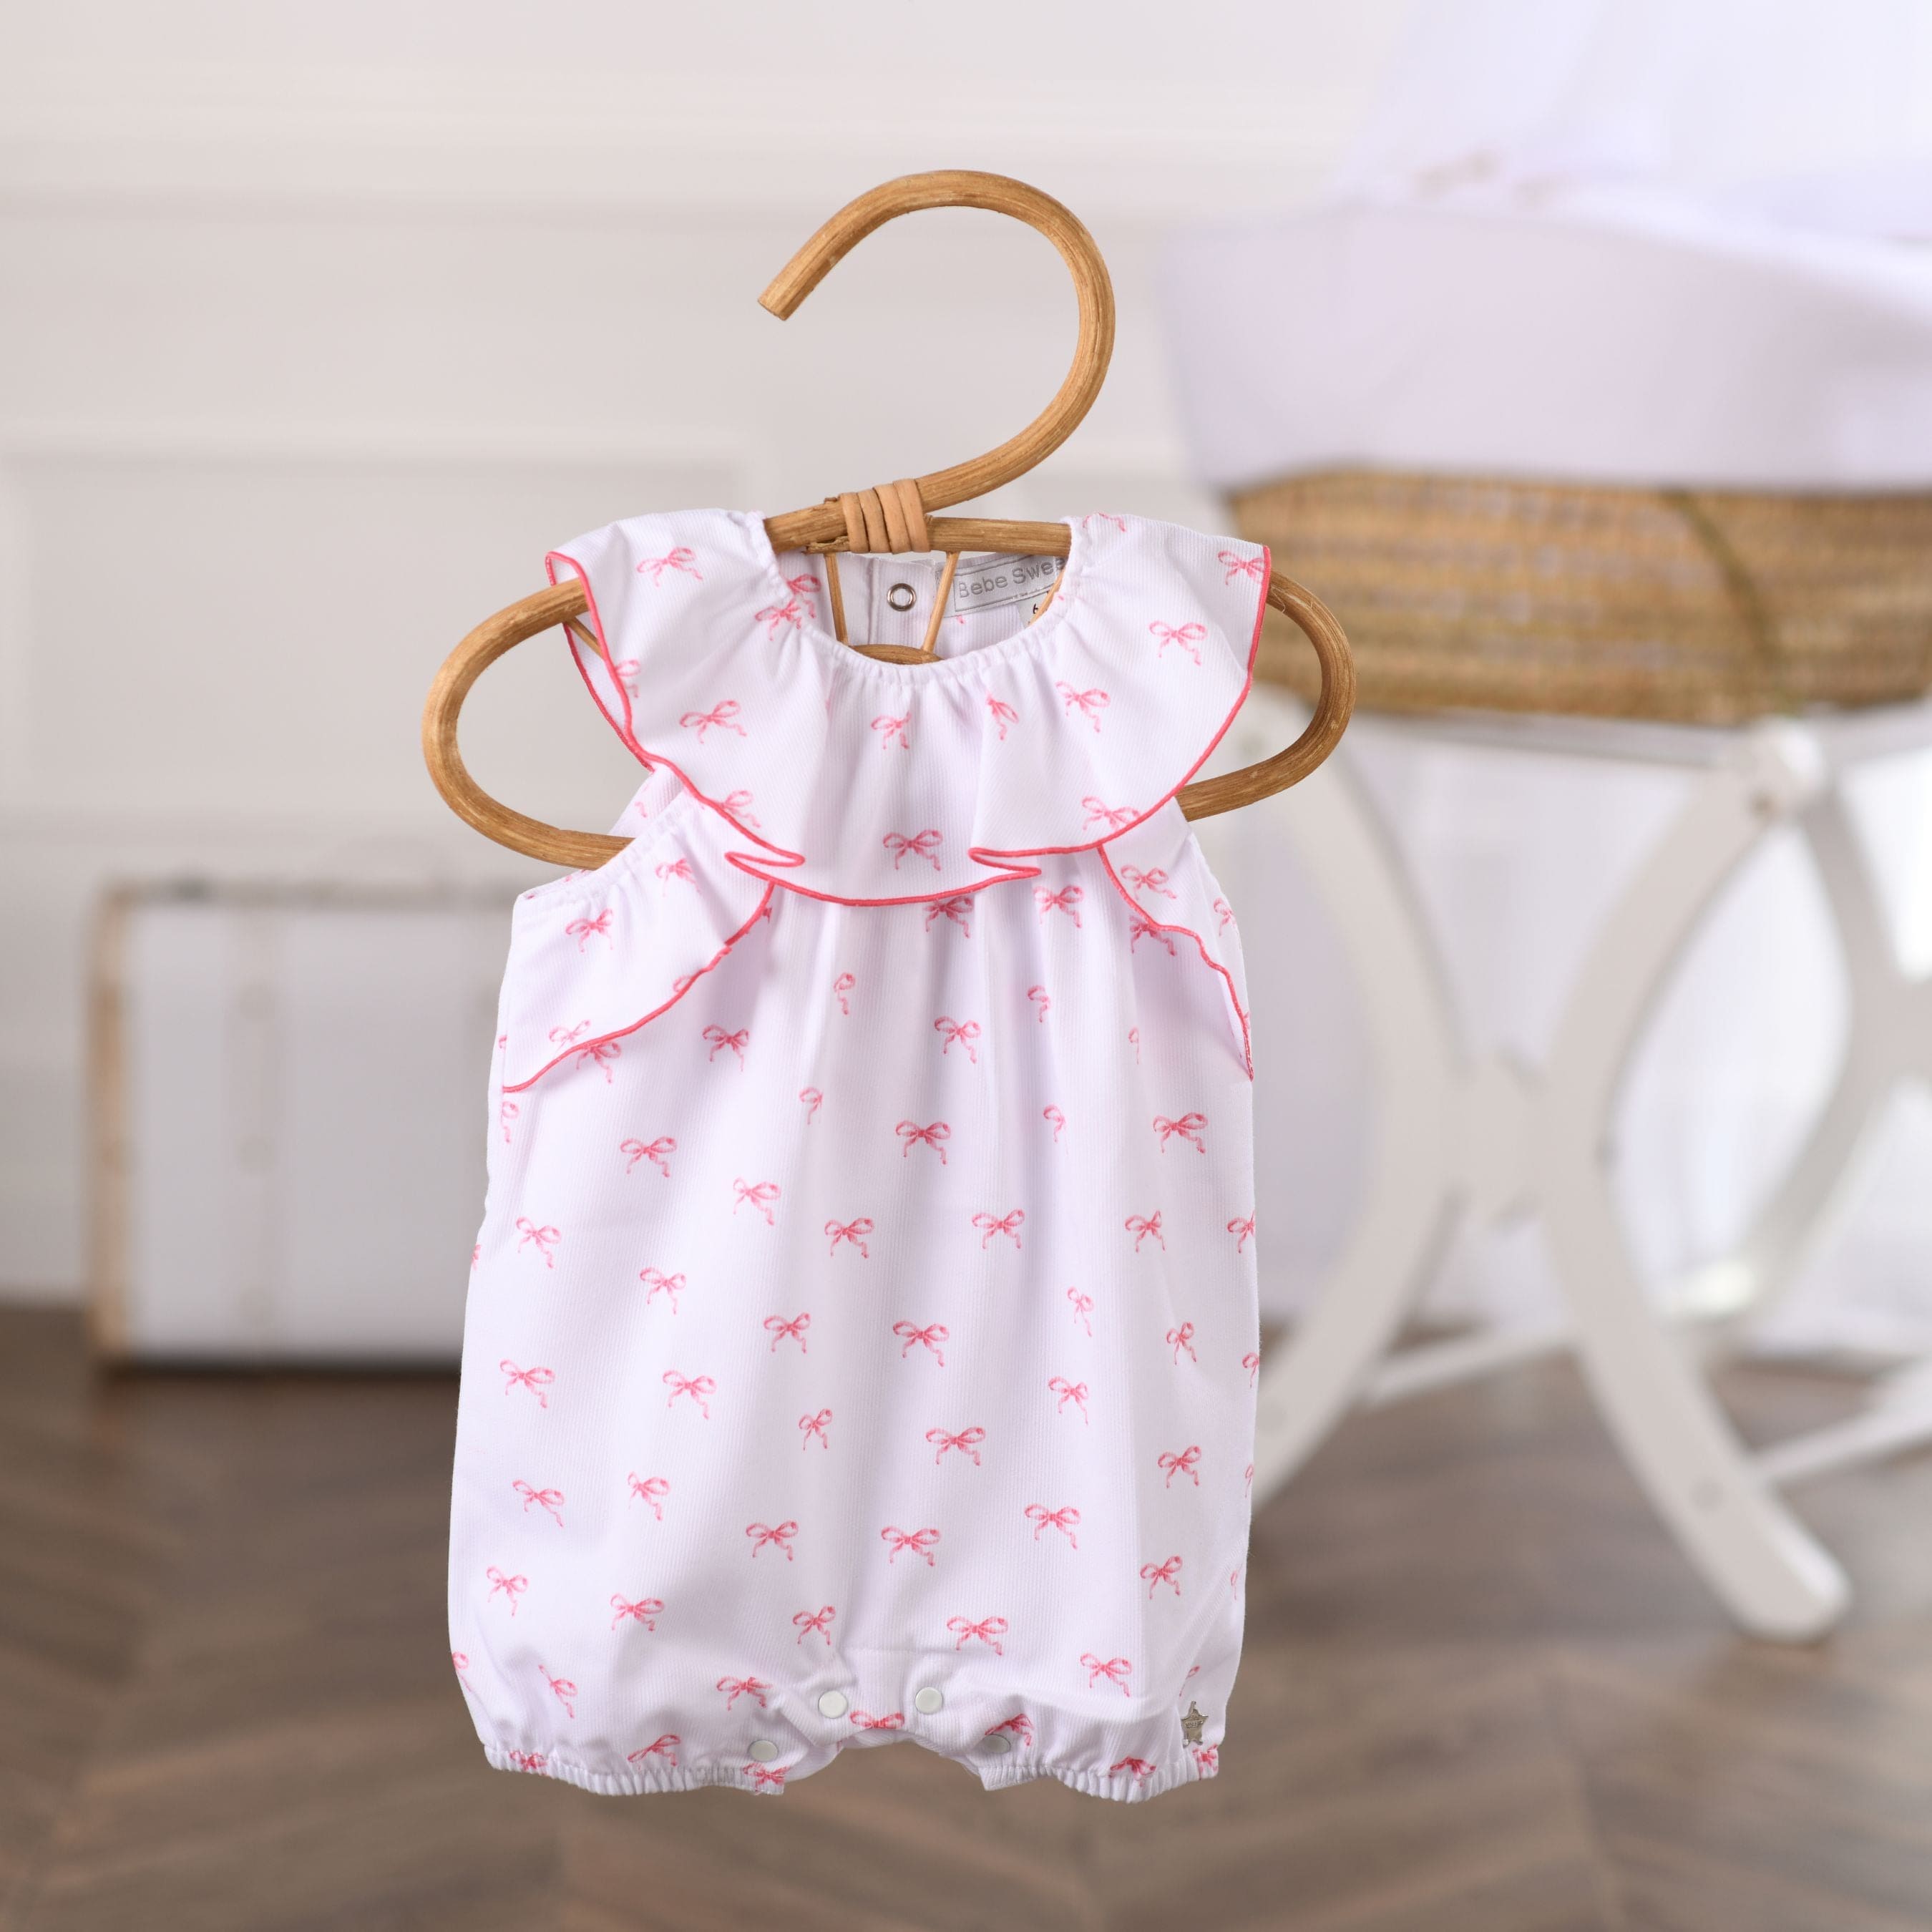 Belle | Girls White & Pink Bow Print Playsuit